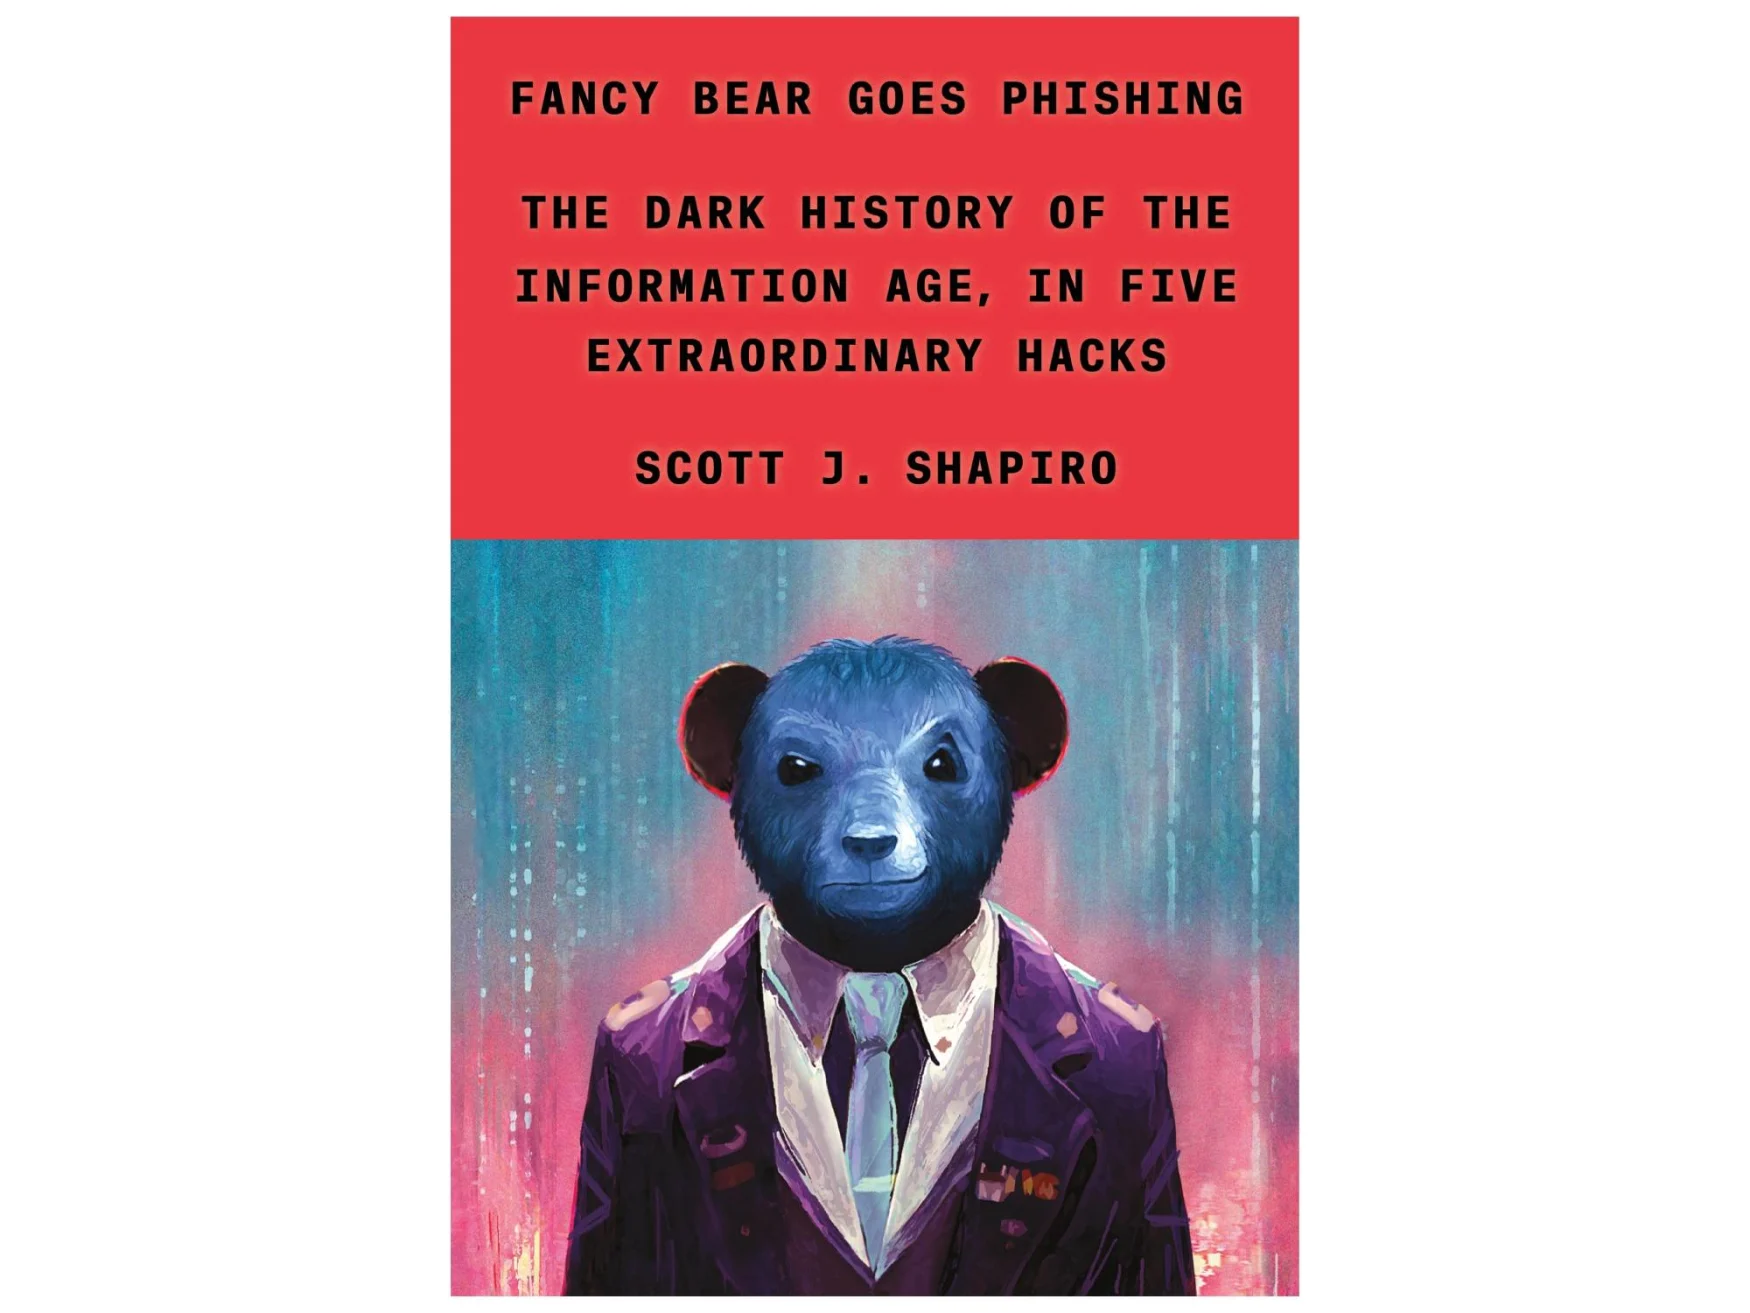 portrait-oriented oil painting of a smirking bear in a purple suit, black text on red background top third of the space.